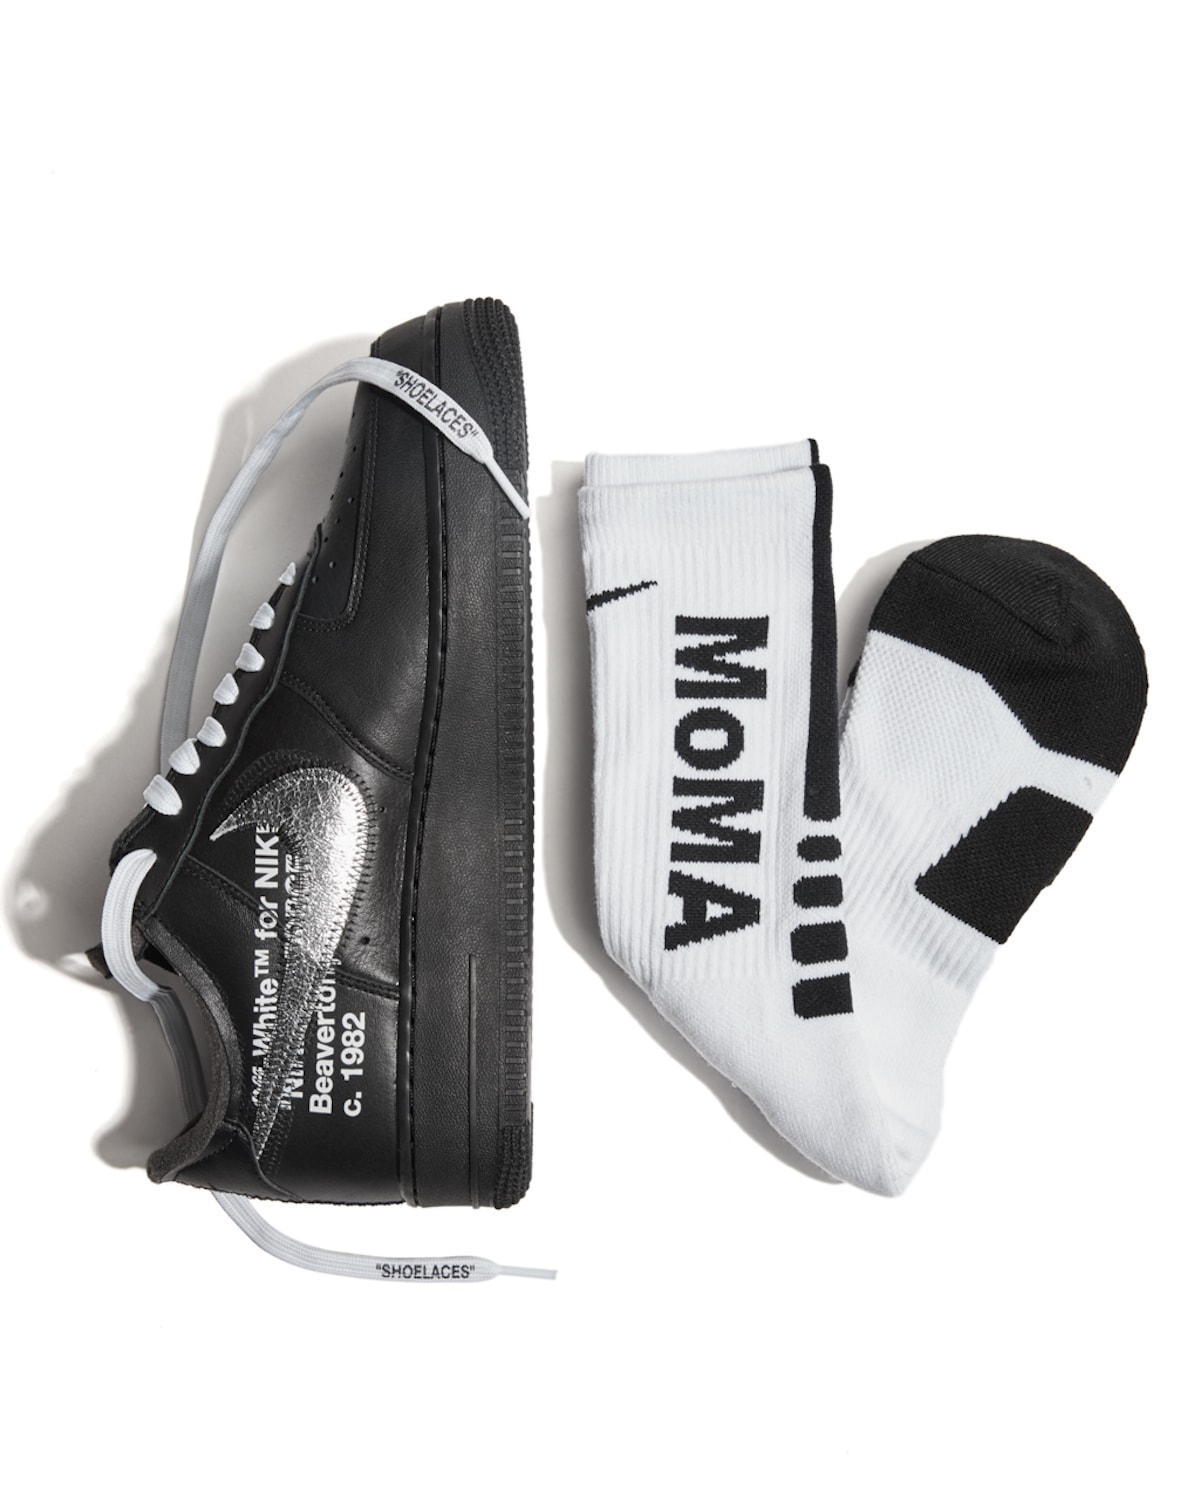 Virgil Abloh x Nike Air Force 1 for MoMA 聯乘鞋款正式發佈